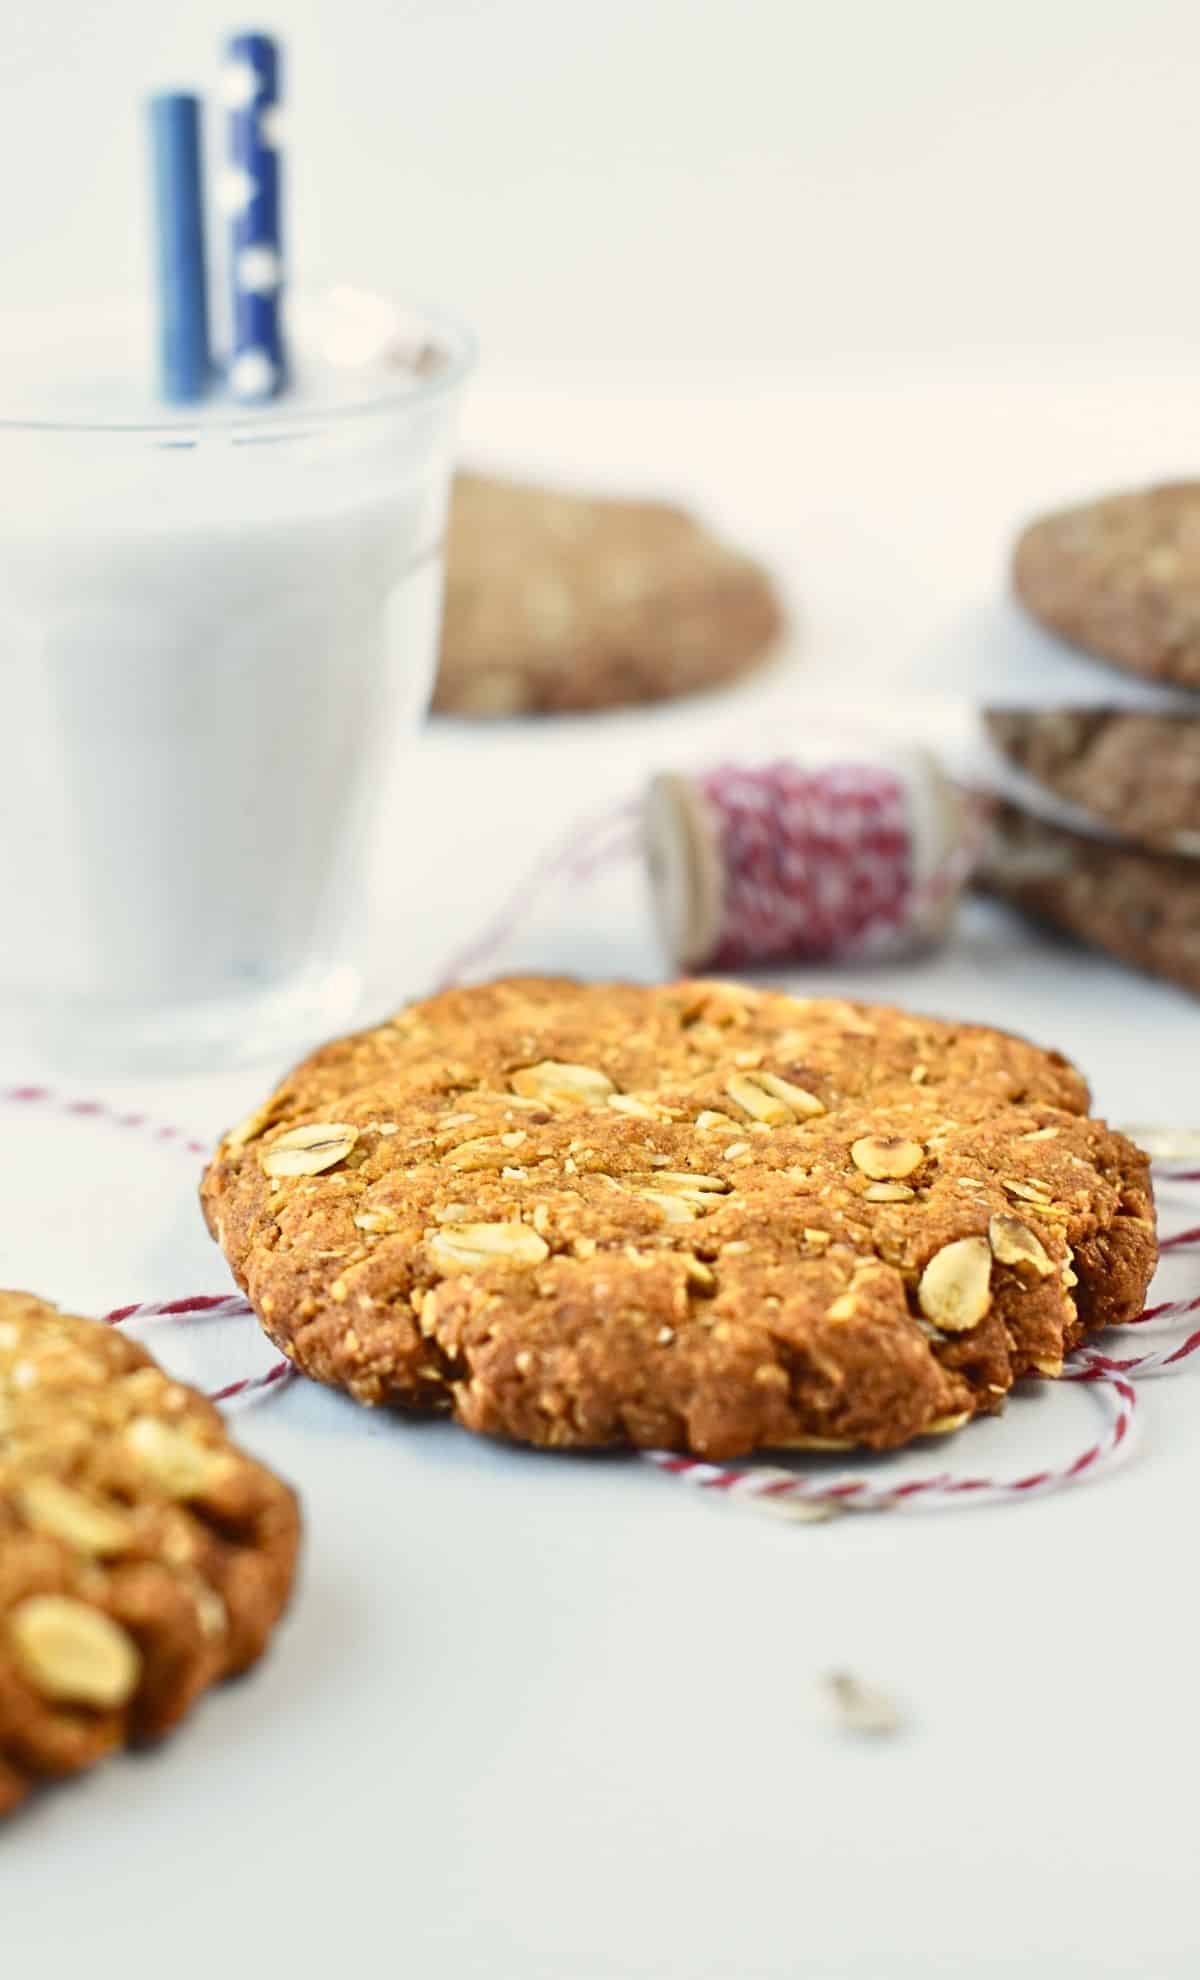 Anzac Biscuits in front of a glass of plant-based milk.